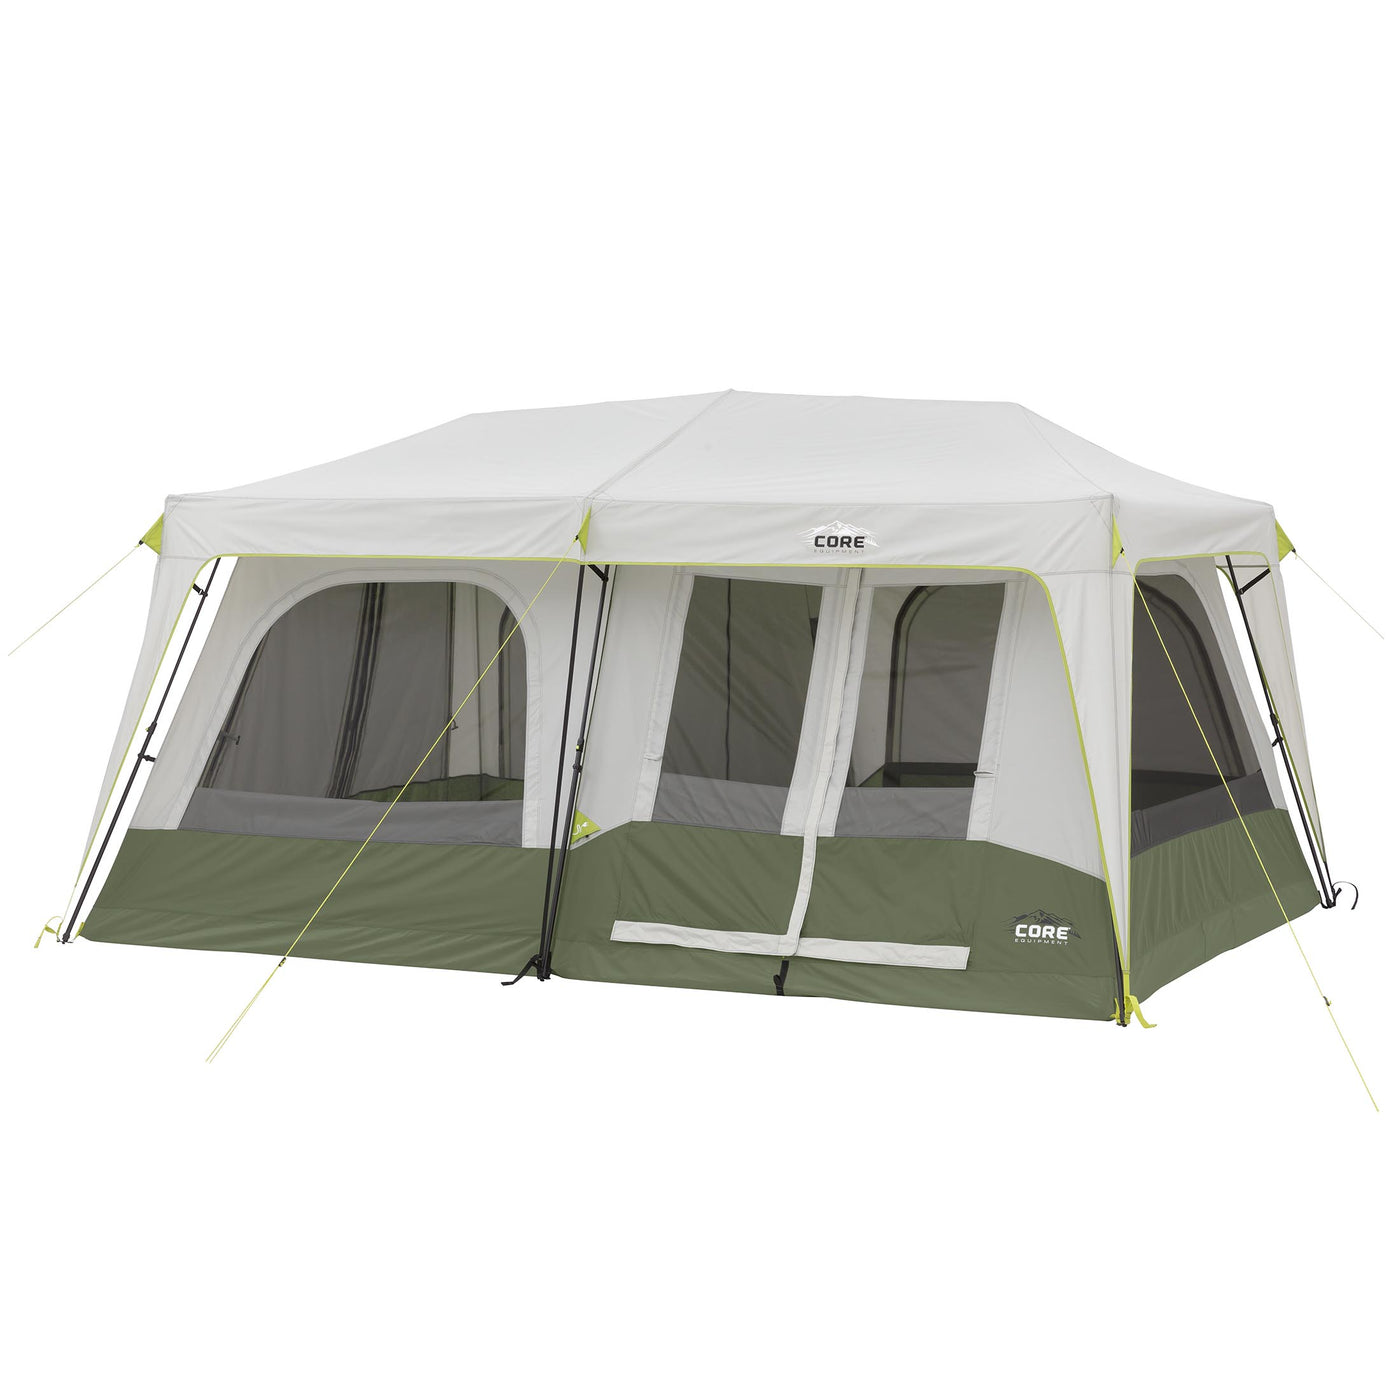 CORE 10 Person Tent, Large Multi Room Tent for India